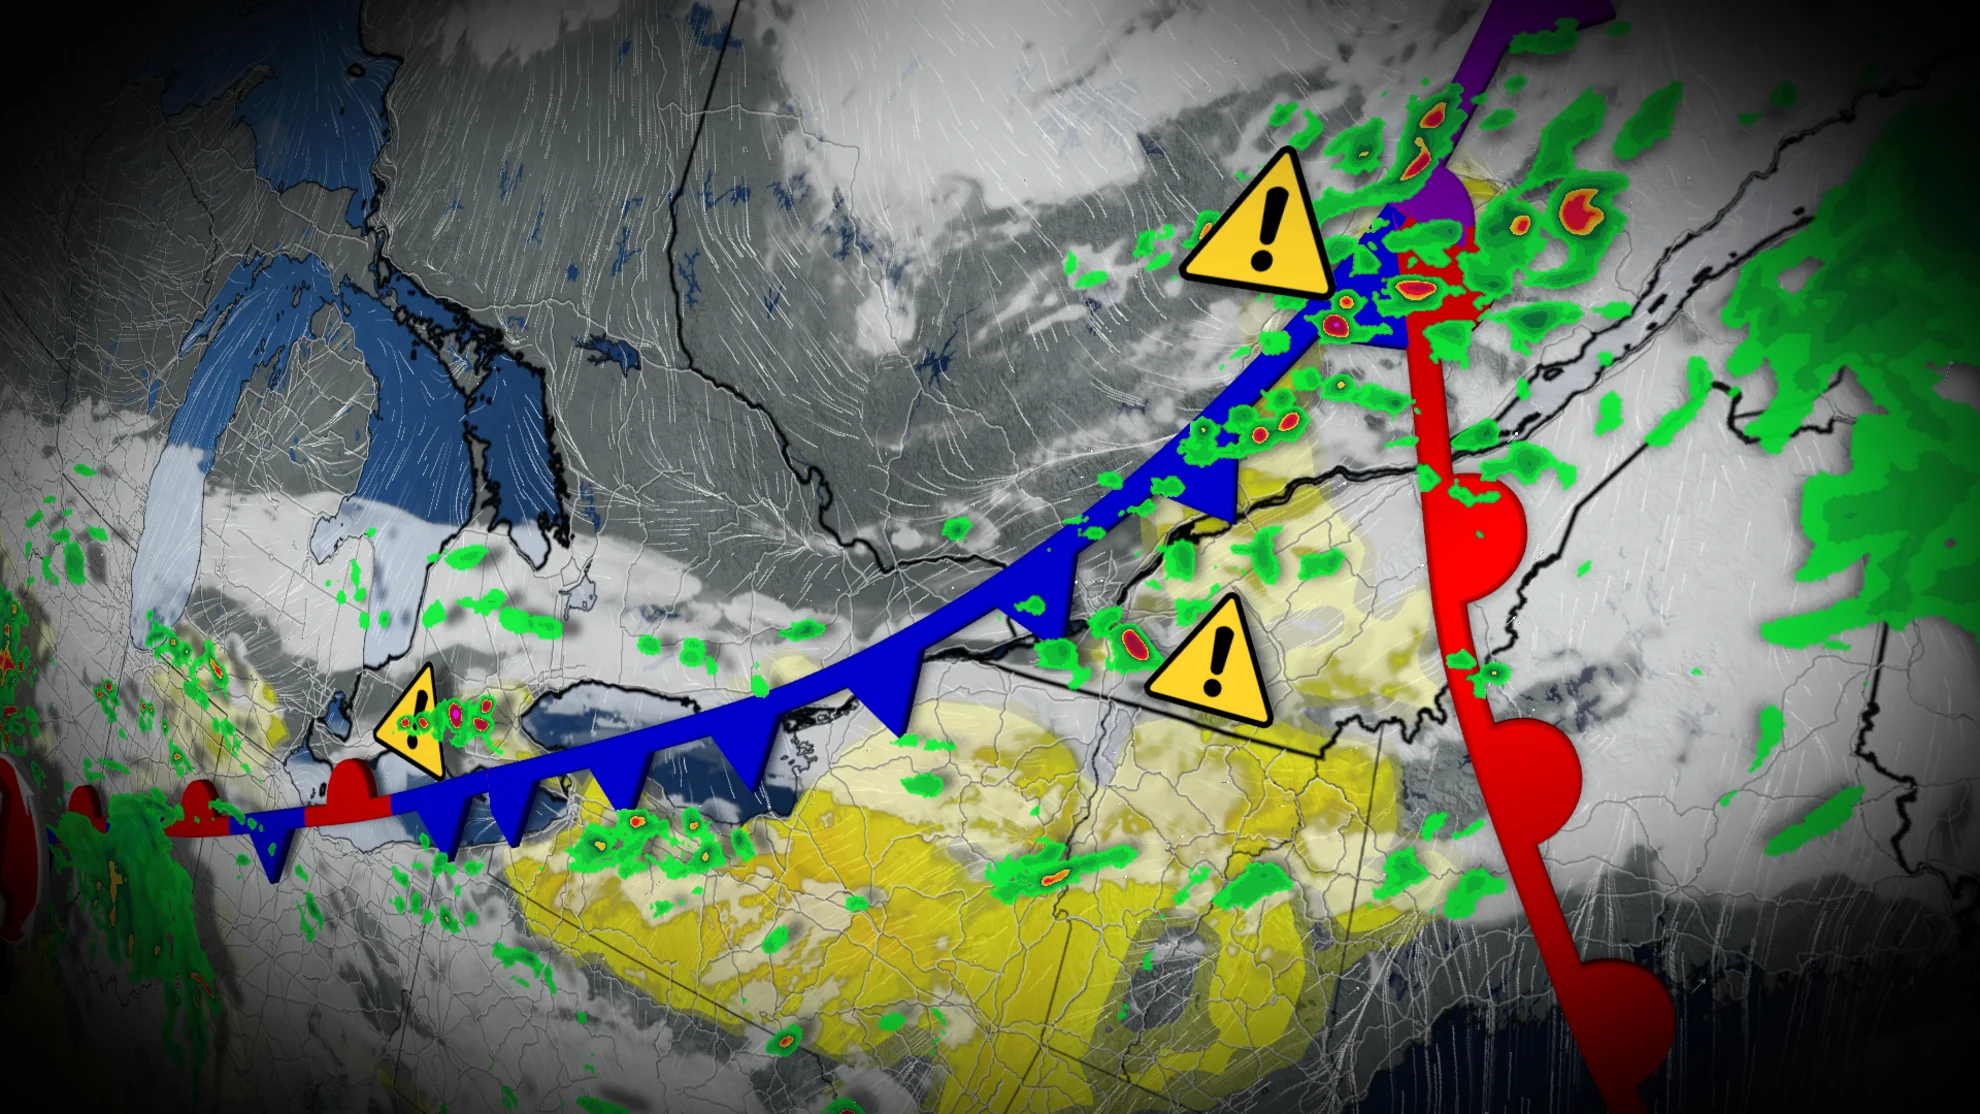 Thunderstorm threat lingers over Ontario today, as wildfire smoke spreads in from Western Canada. See what to watch for, here